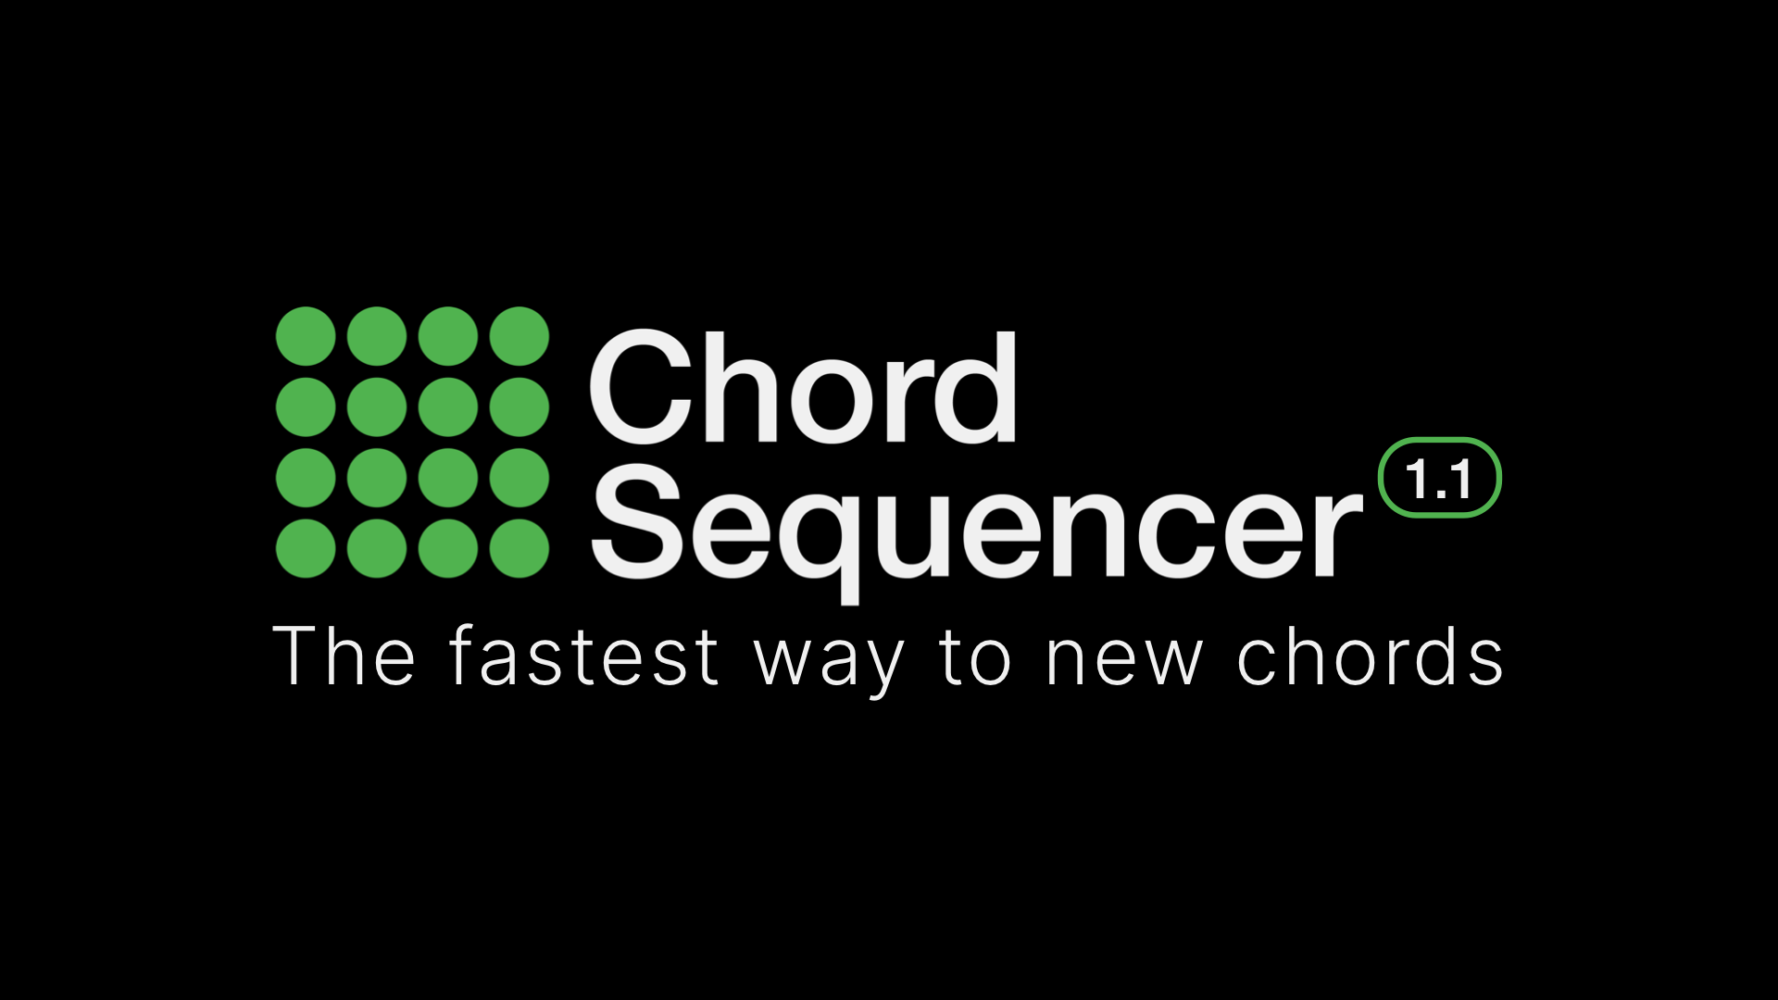 Introducing Chord Sequencer 1.1